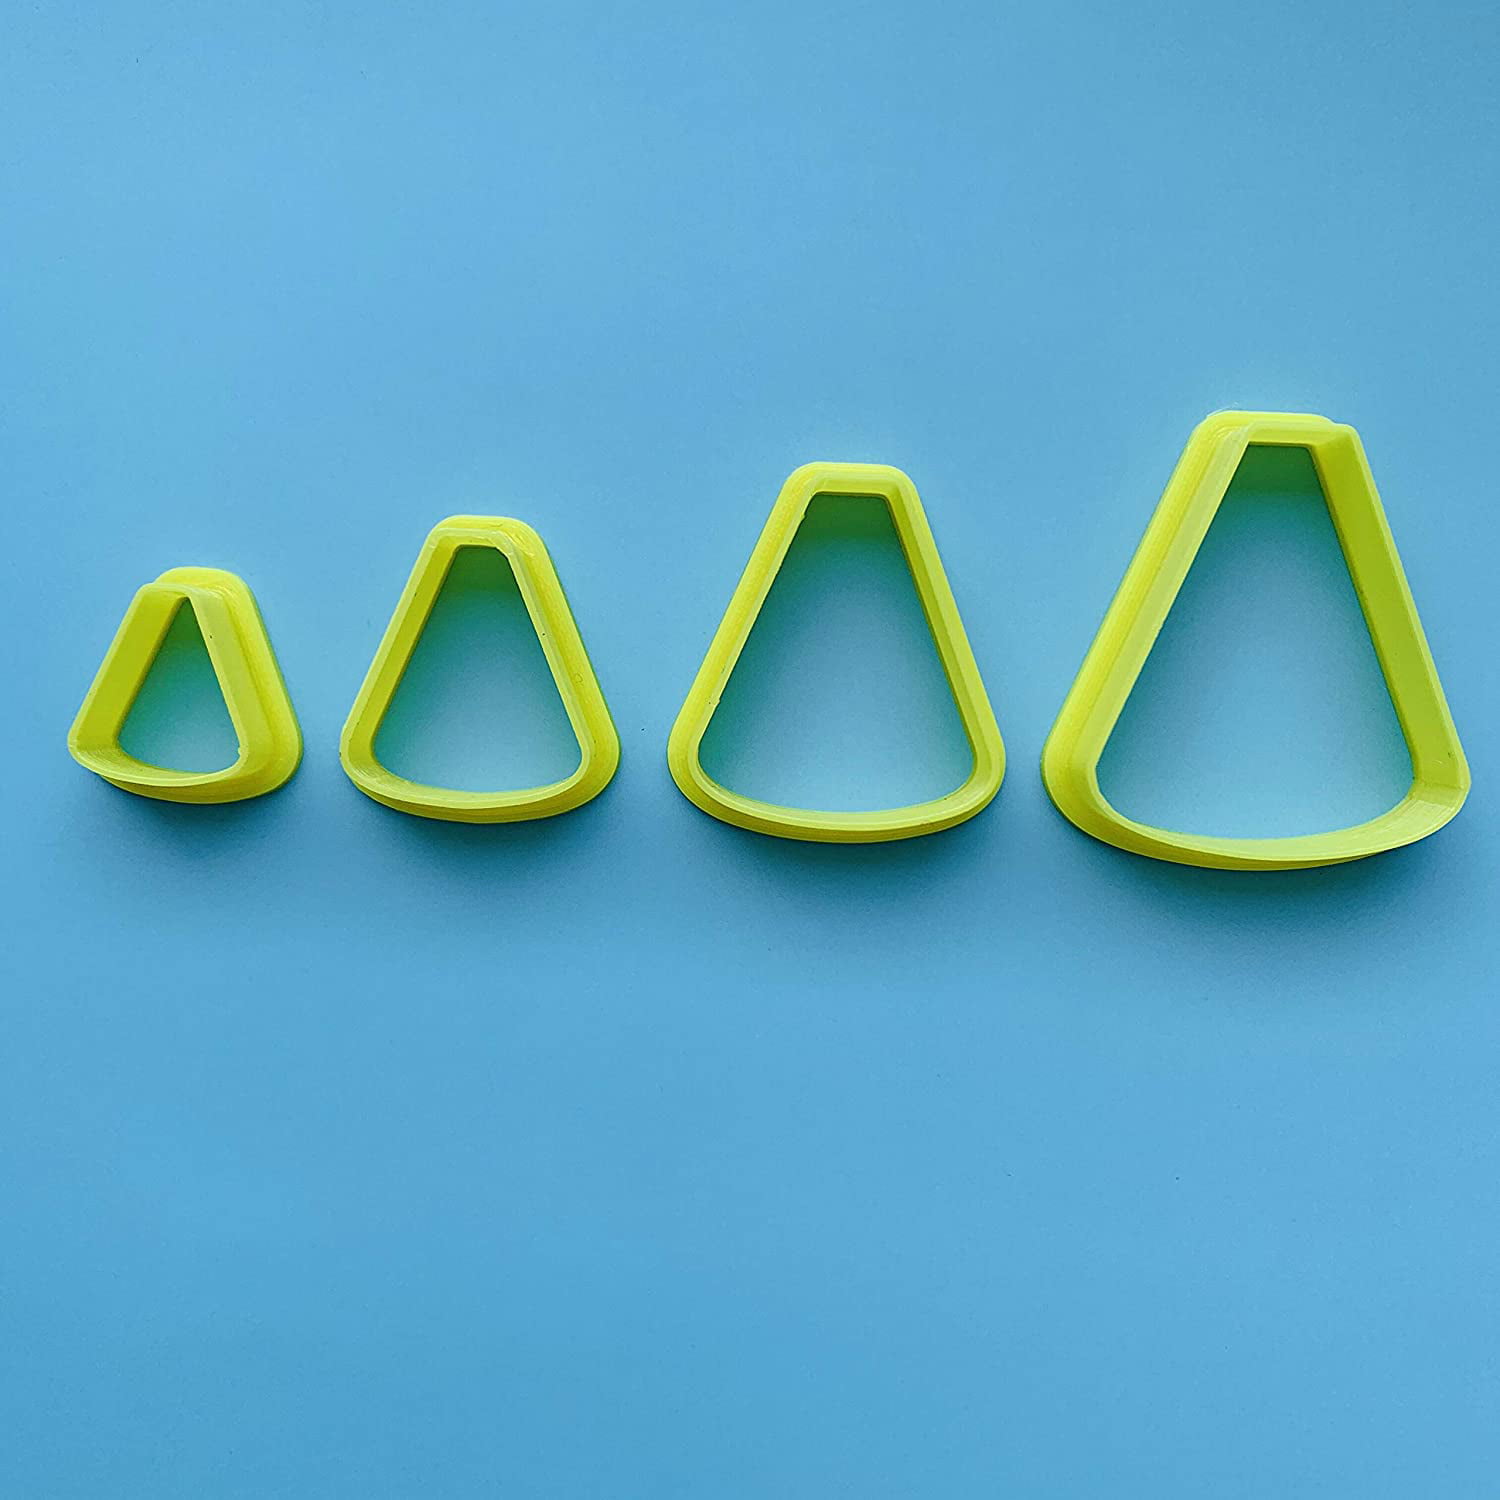 Details about   Triangle Shape Cookie Cutters Polymer Clay Jewelry Fondant Baking Craft Cutter 